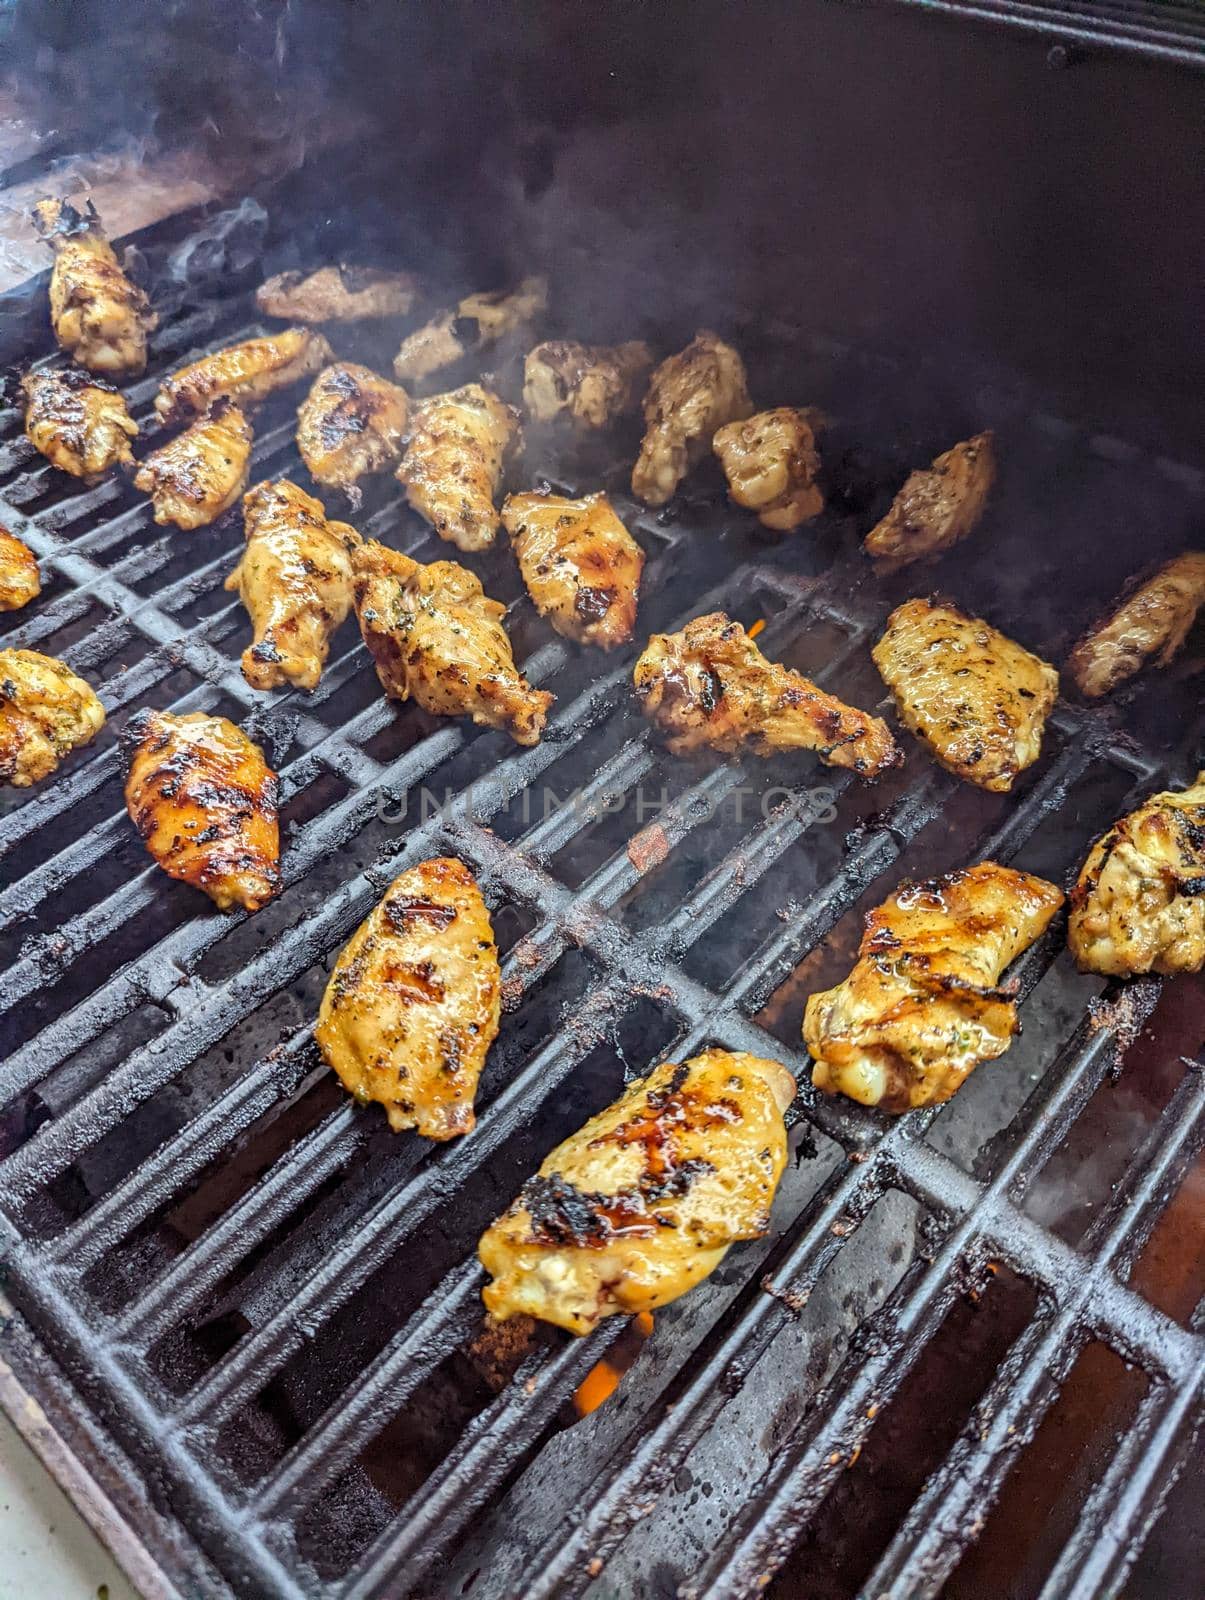 Chicken meat fried on a barbecue grill